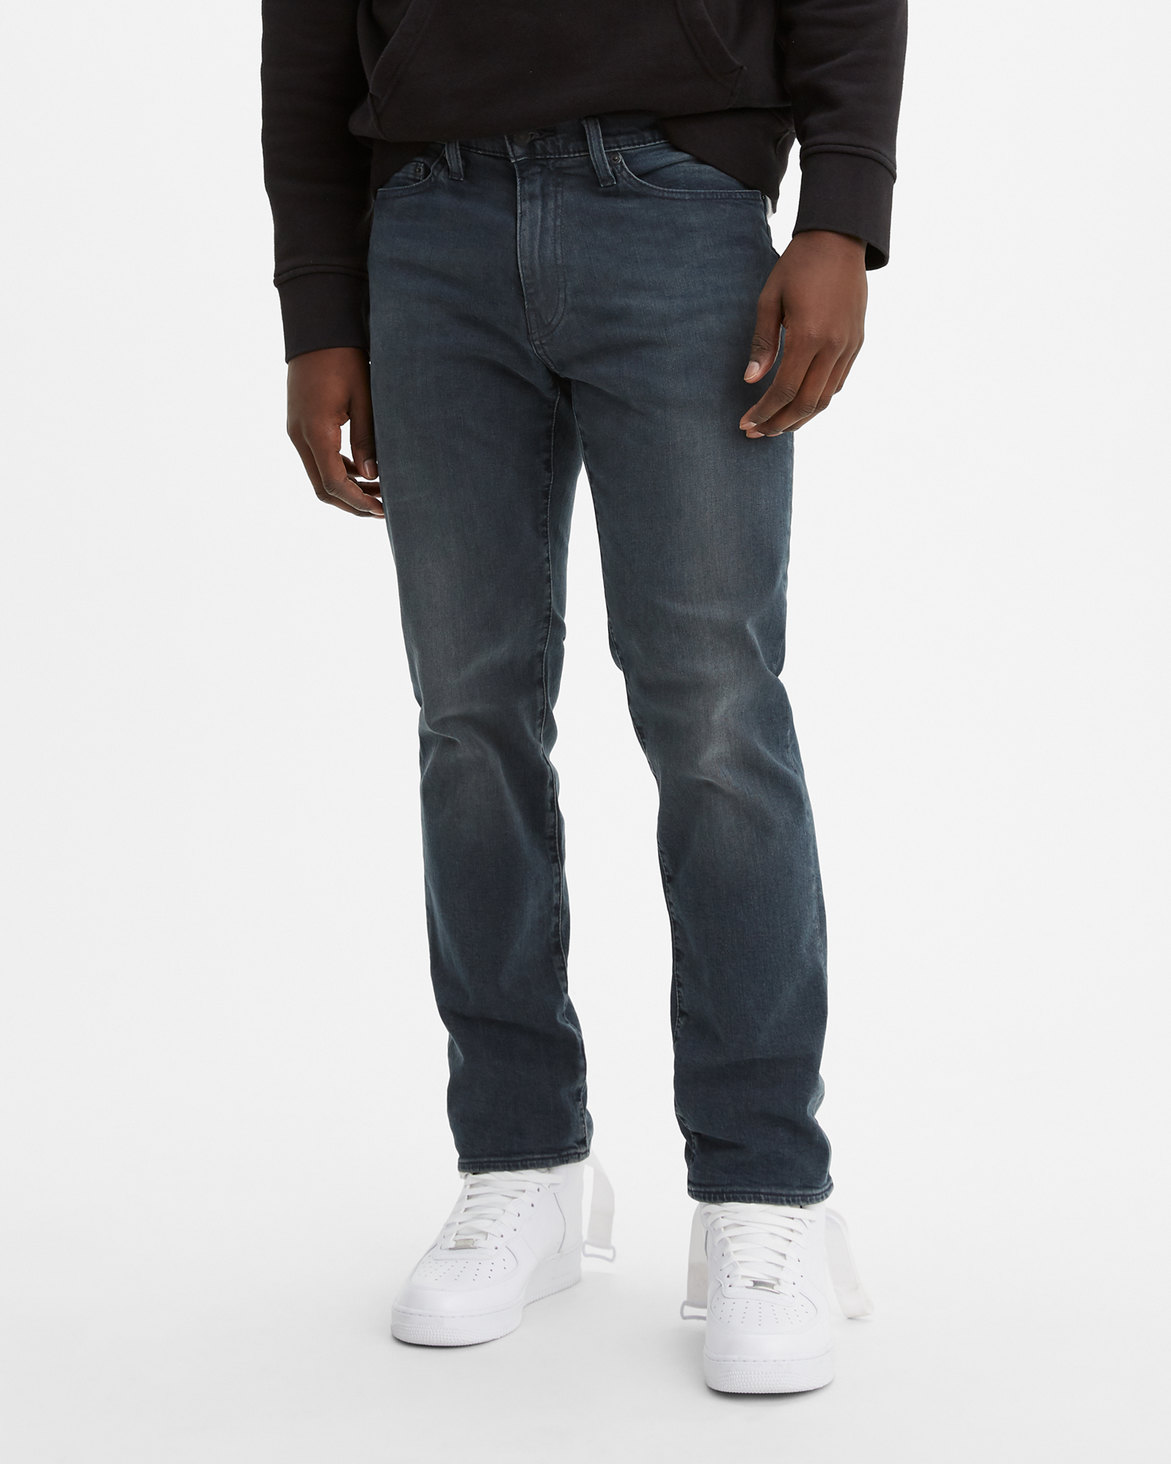 541 Athletic Taper Fit Jeans | Levi